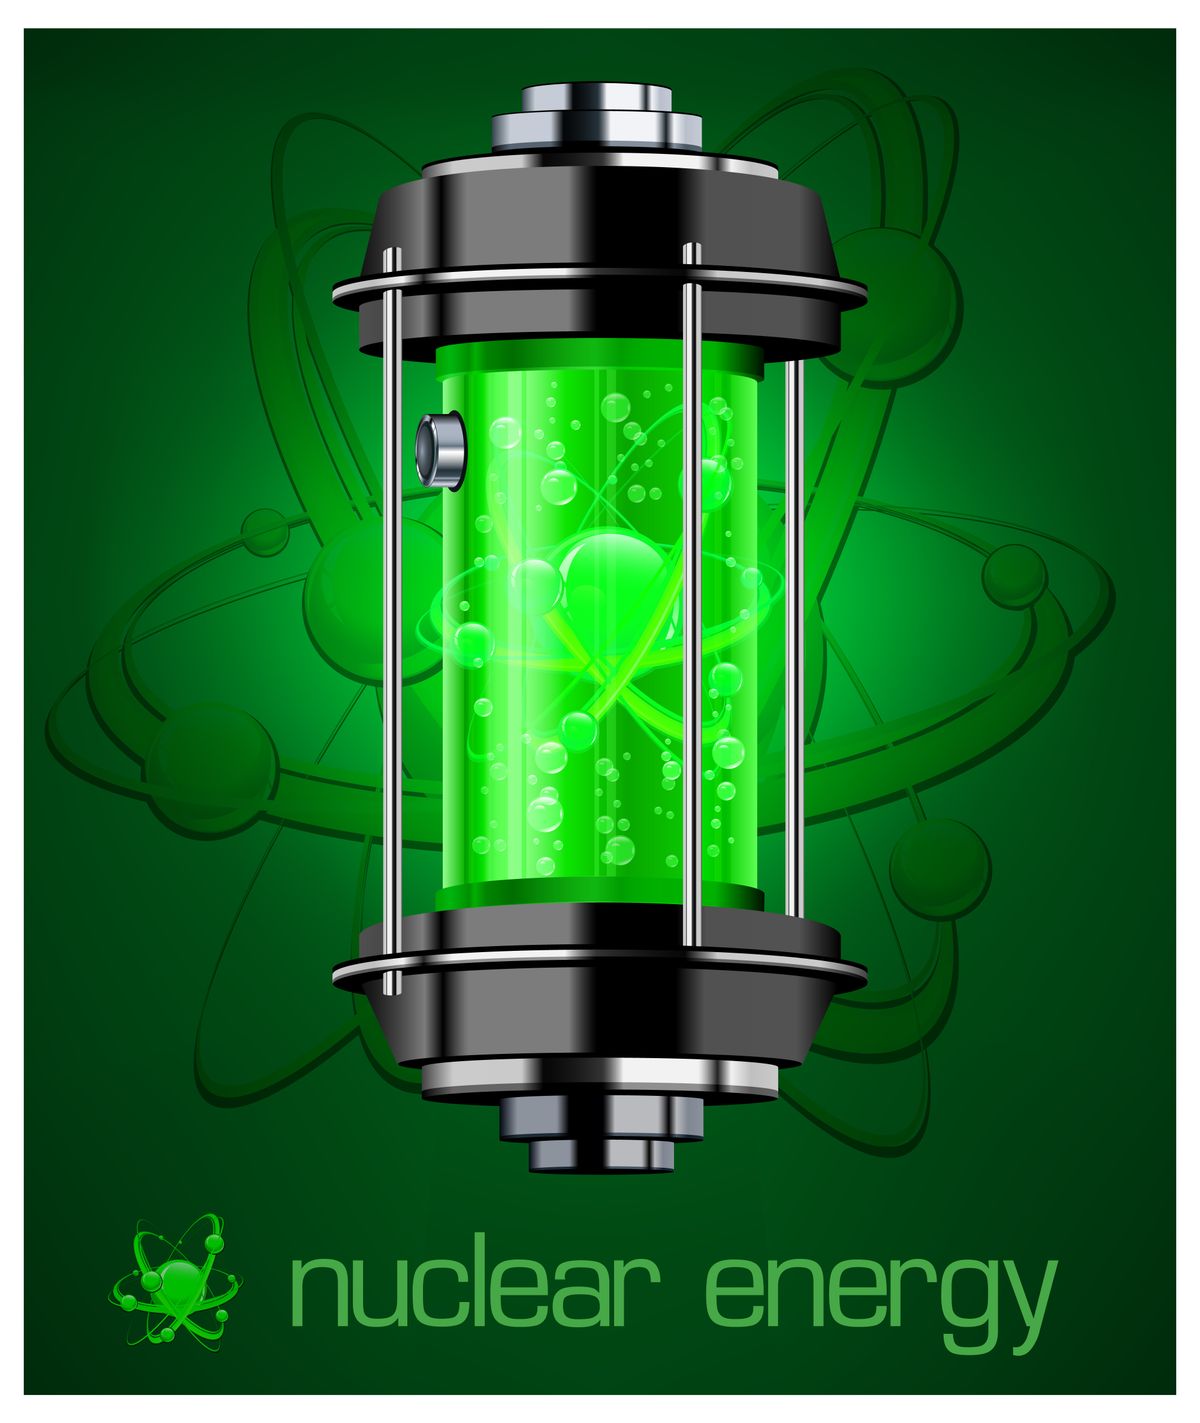 Container,Of,Nuclear,Energy,In,Green,Color,With,Text,,Vector